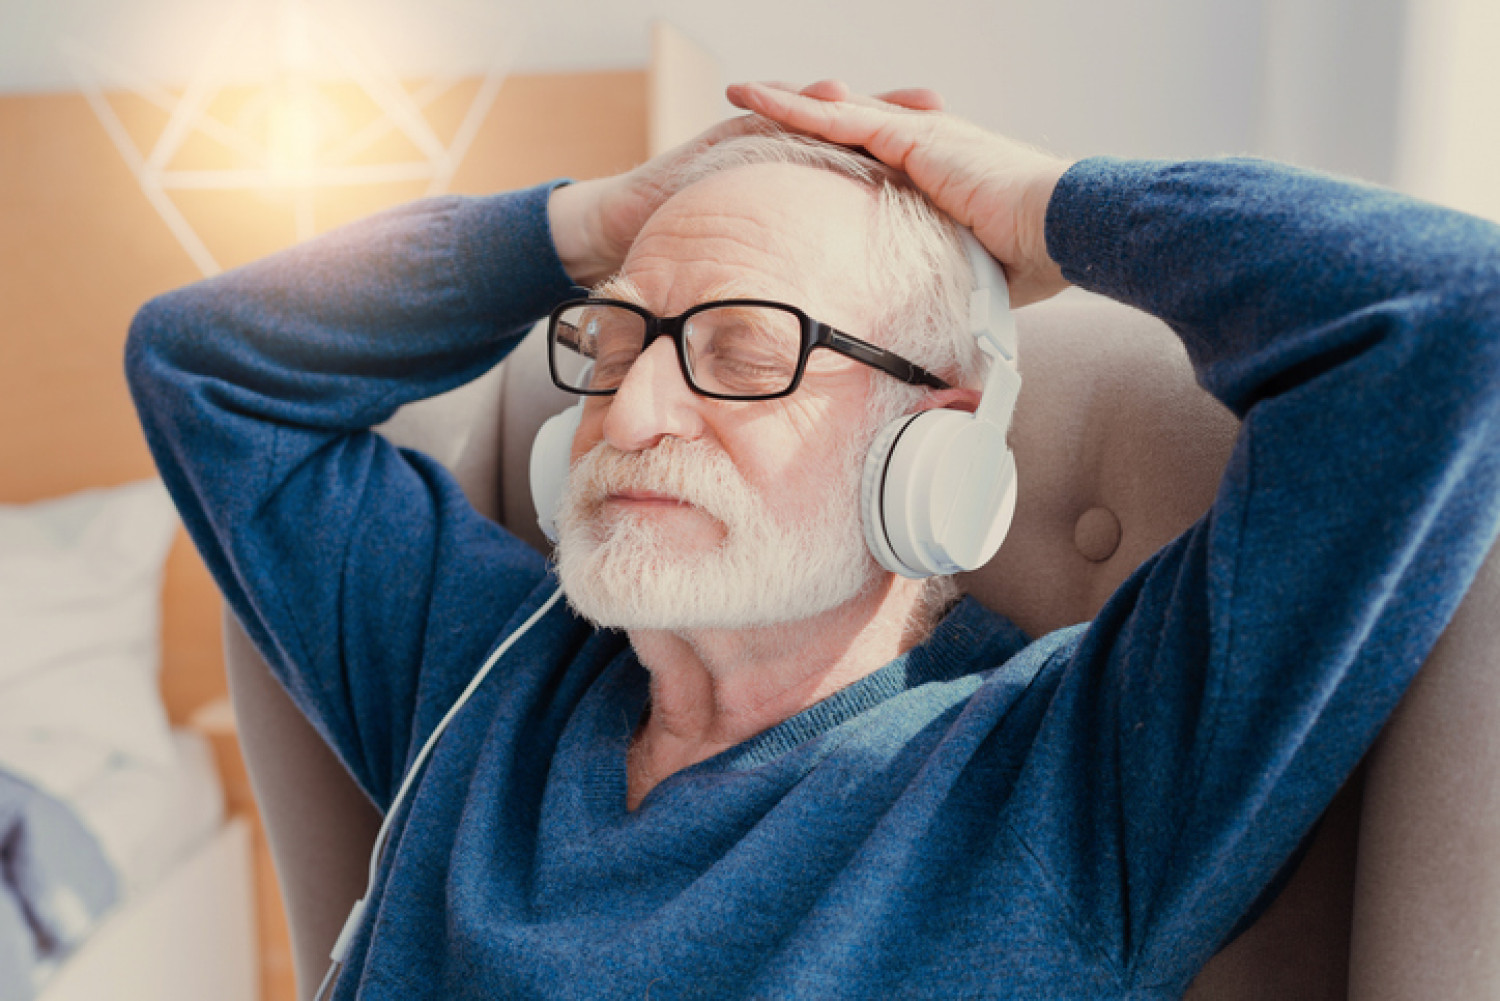 Elderly man relaxes with headphones, enjoying music therapy for dementia.